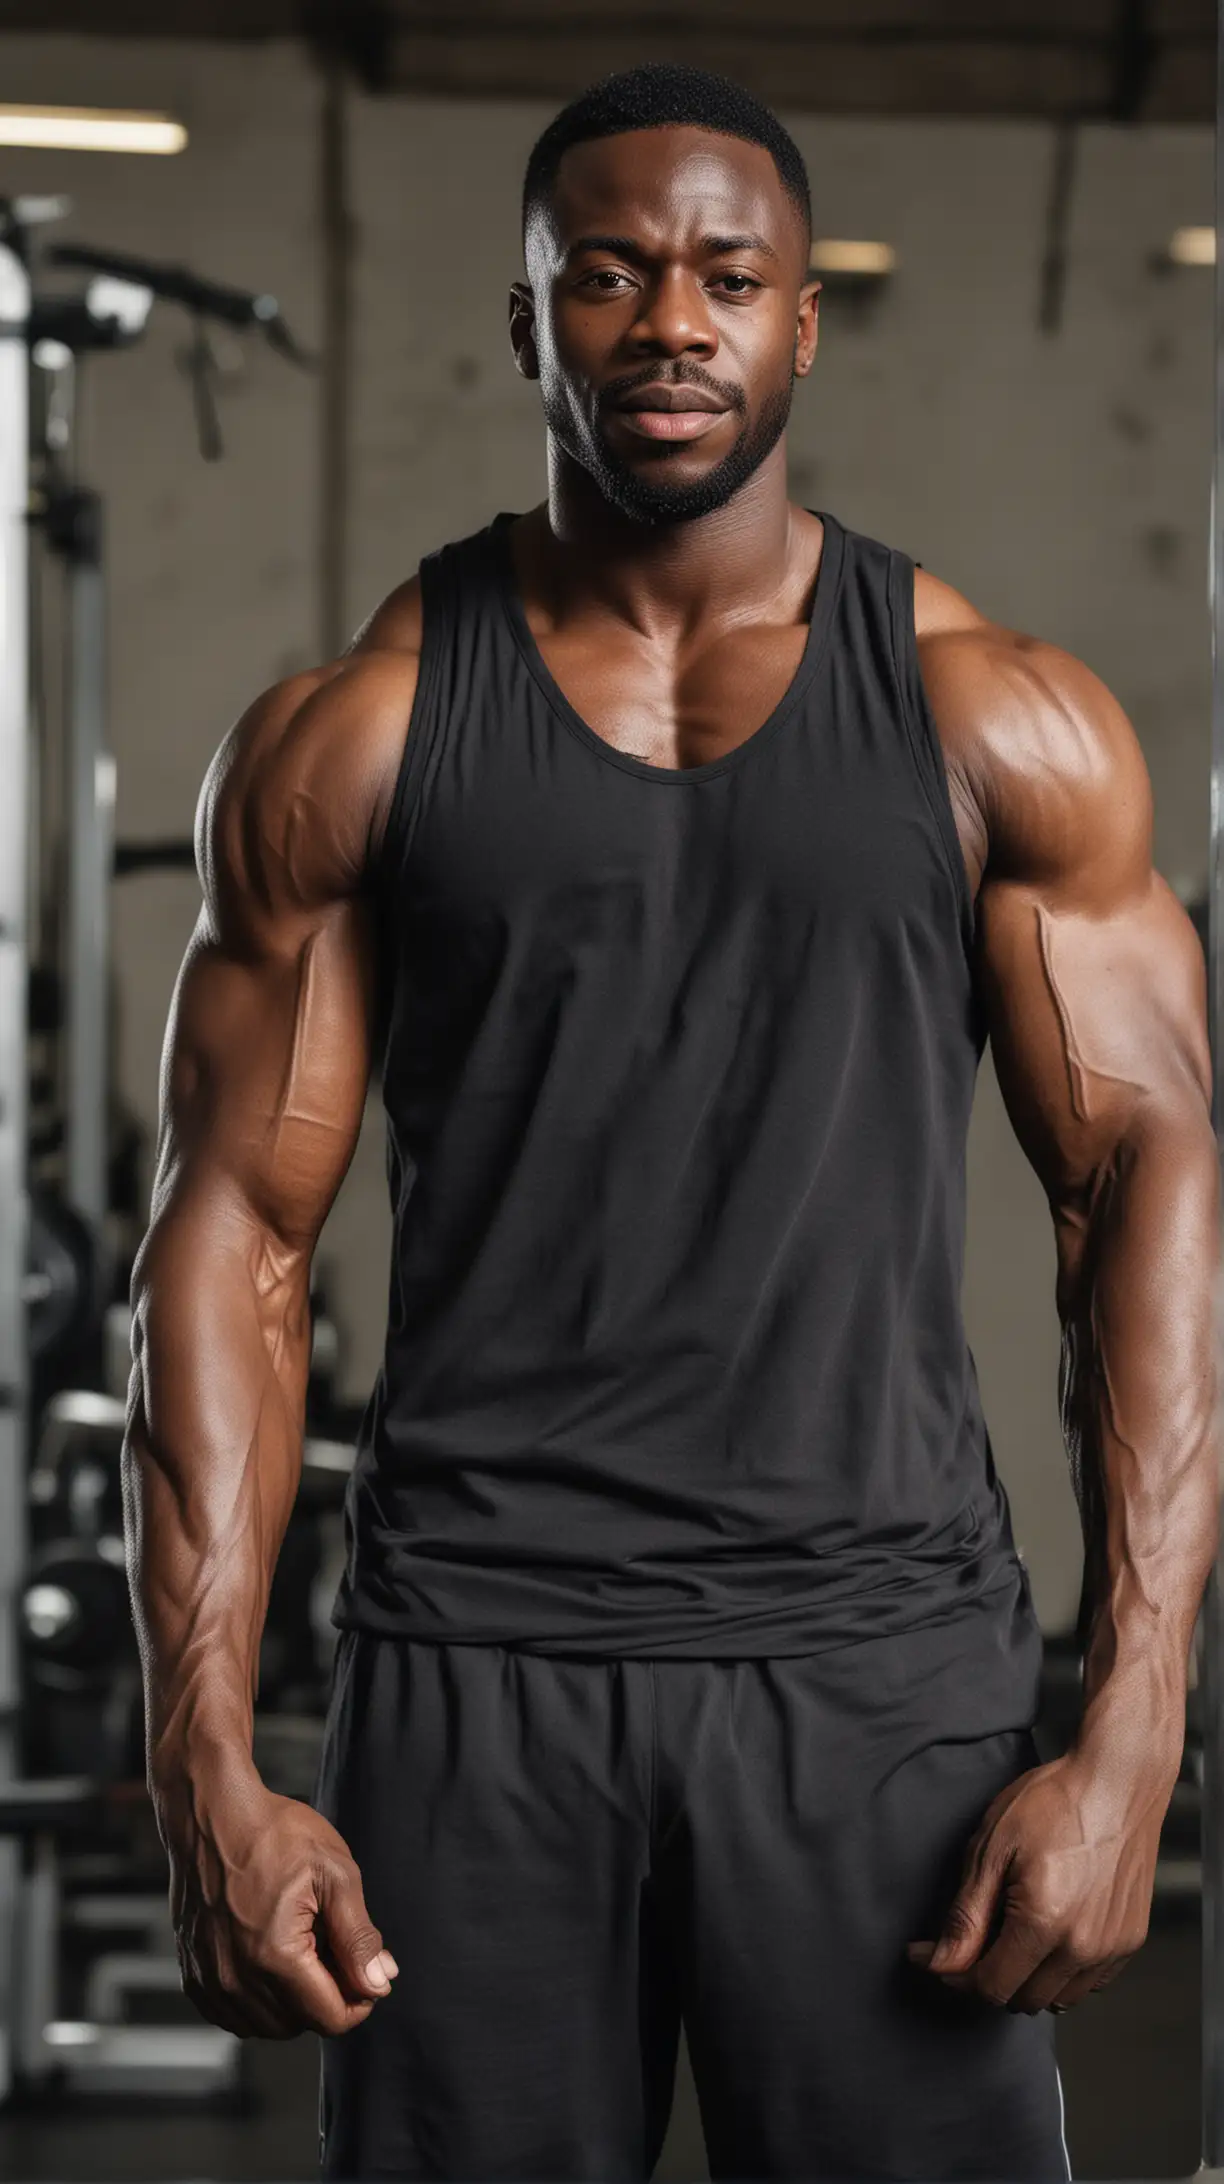 Black man with muscles at gym 